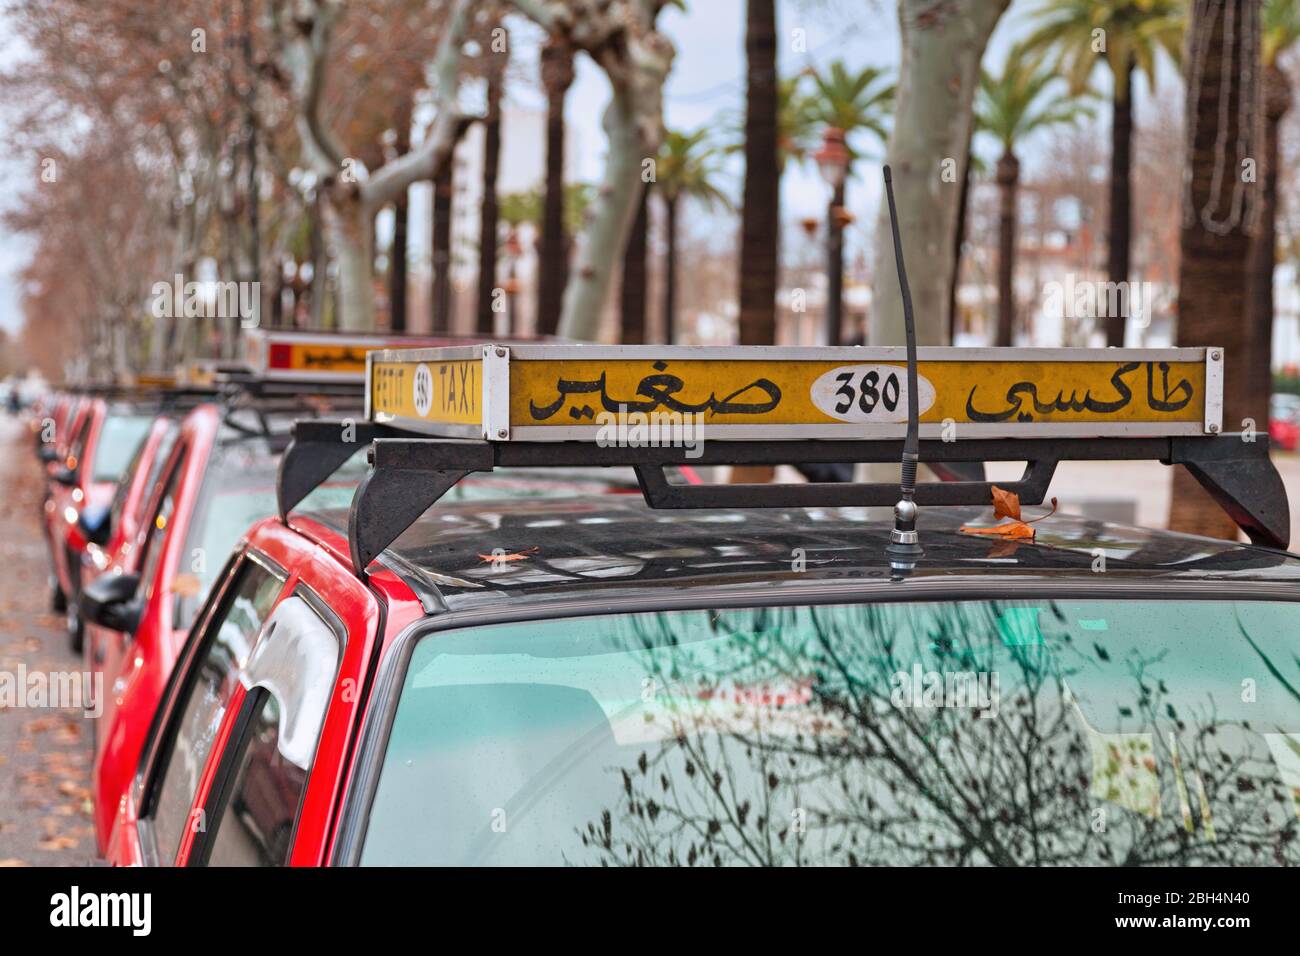 Fez, Morocco - January 20 2019: Row of red Taxis parked in the city center. Stock Photo